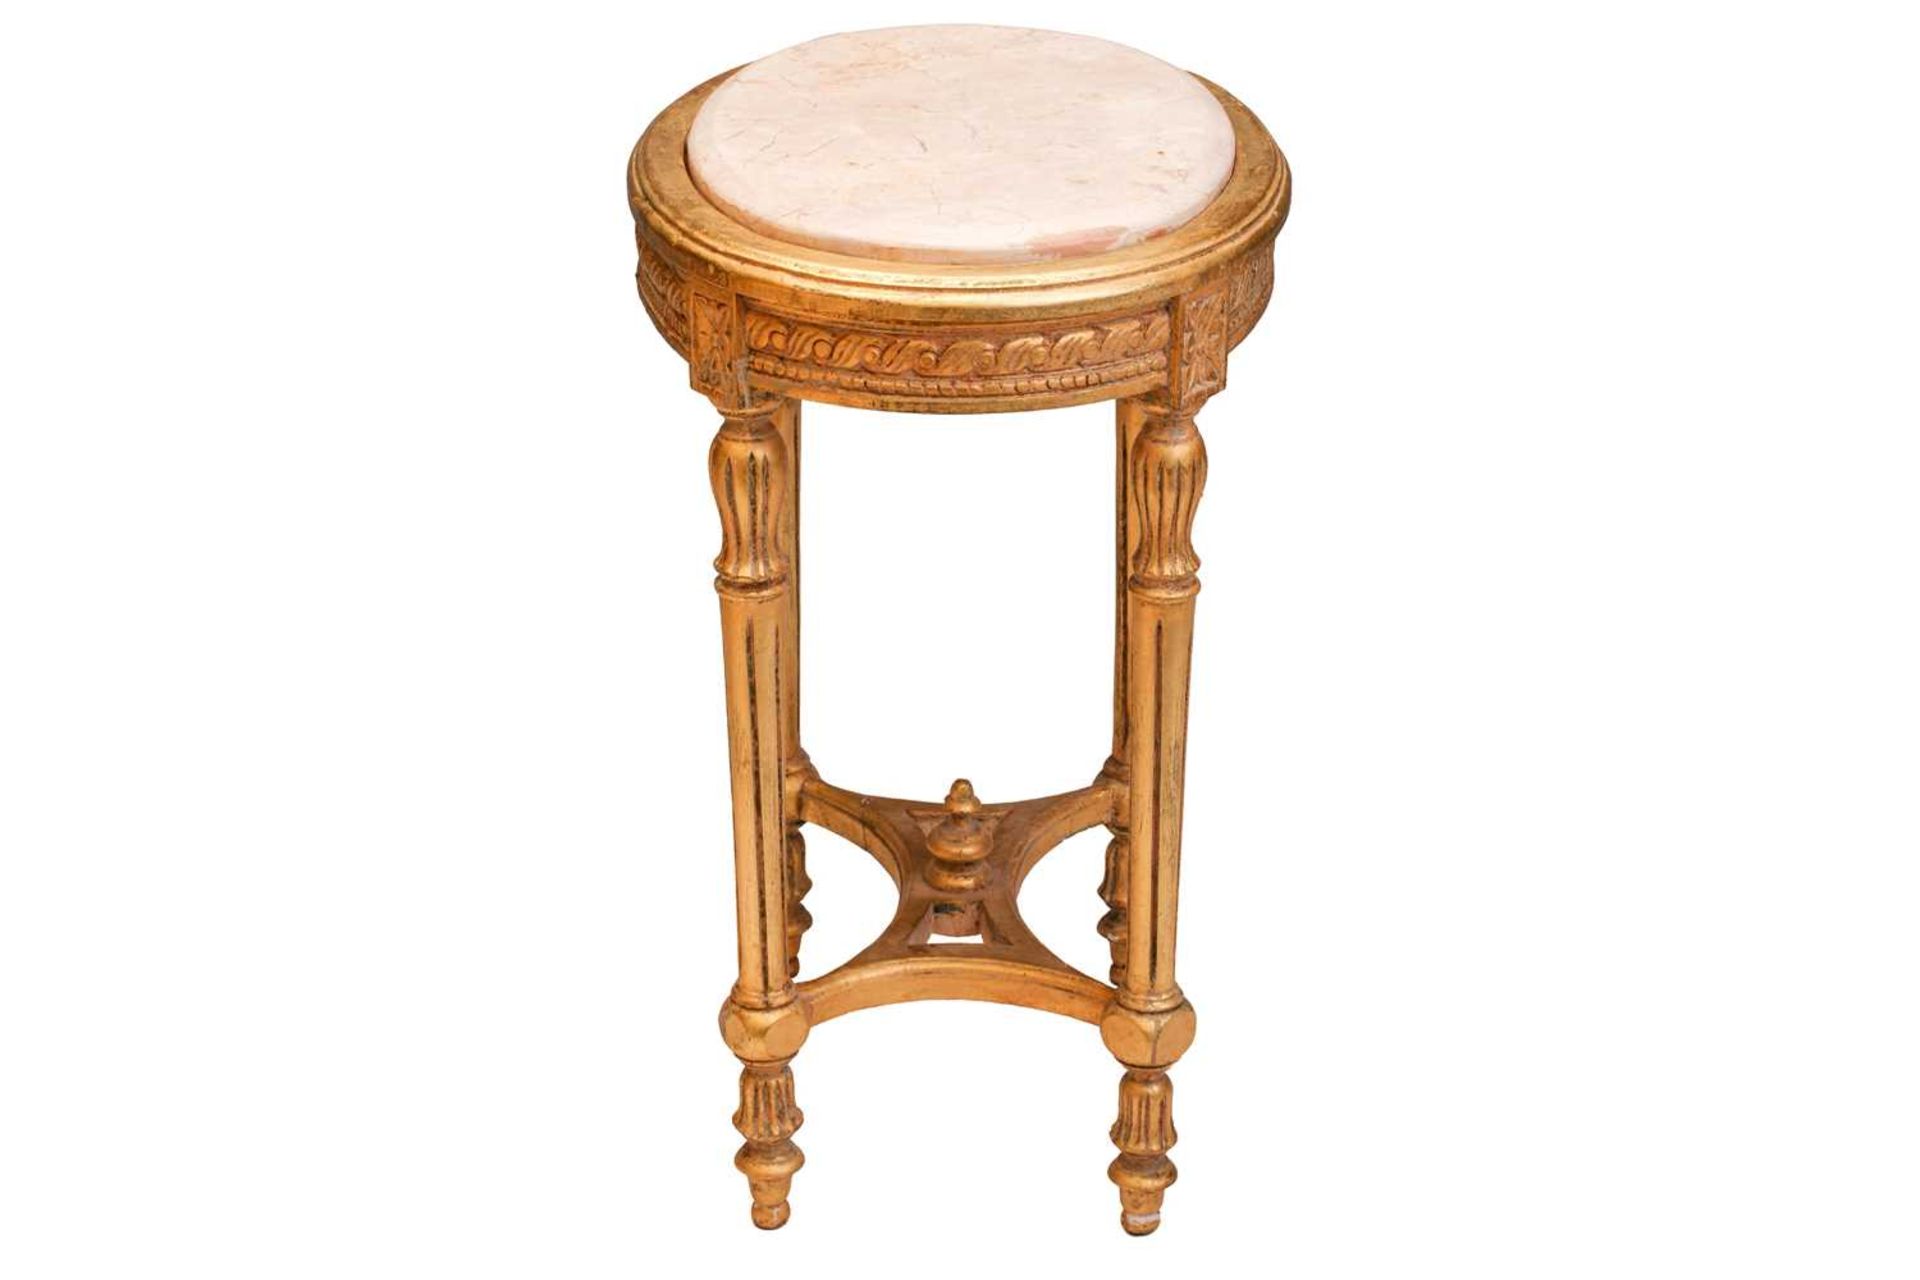 A Louis XVI style marble-topped oval giltwood table, 20th century with turned supports and shaped - Image 3 of 10